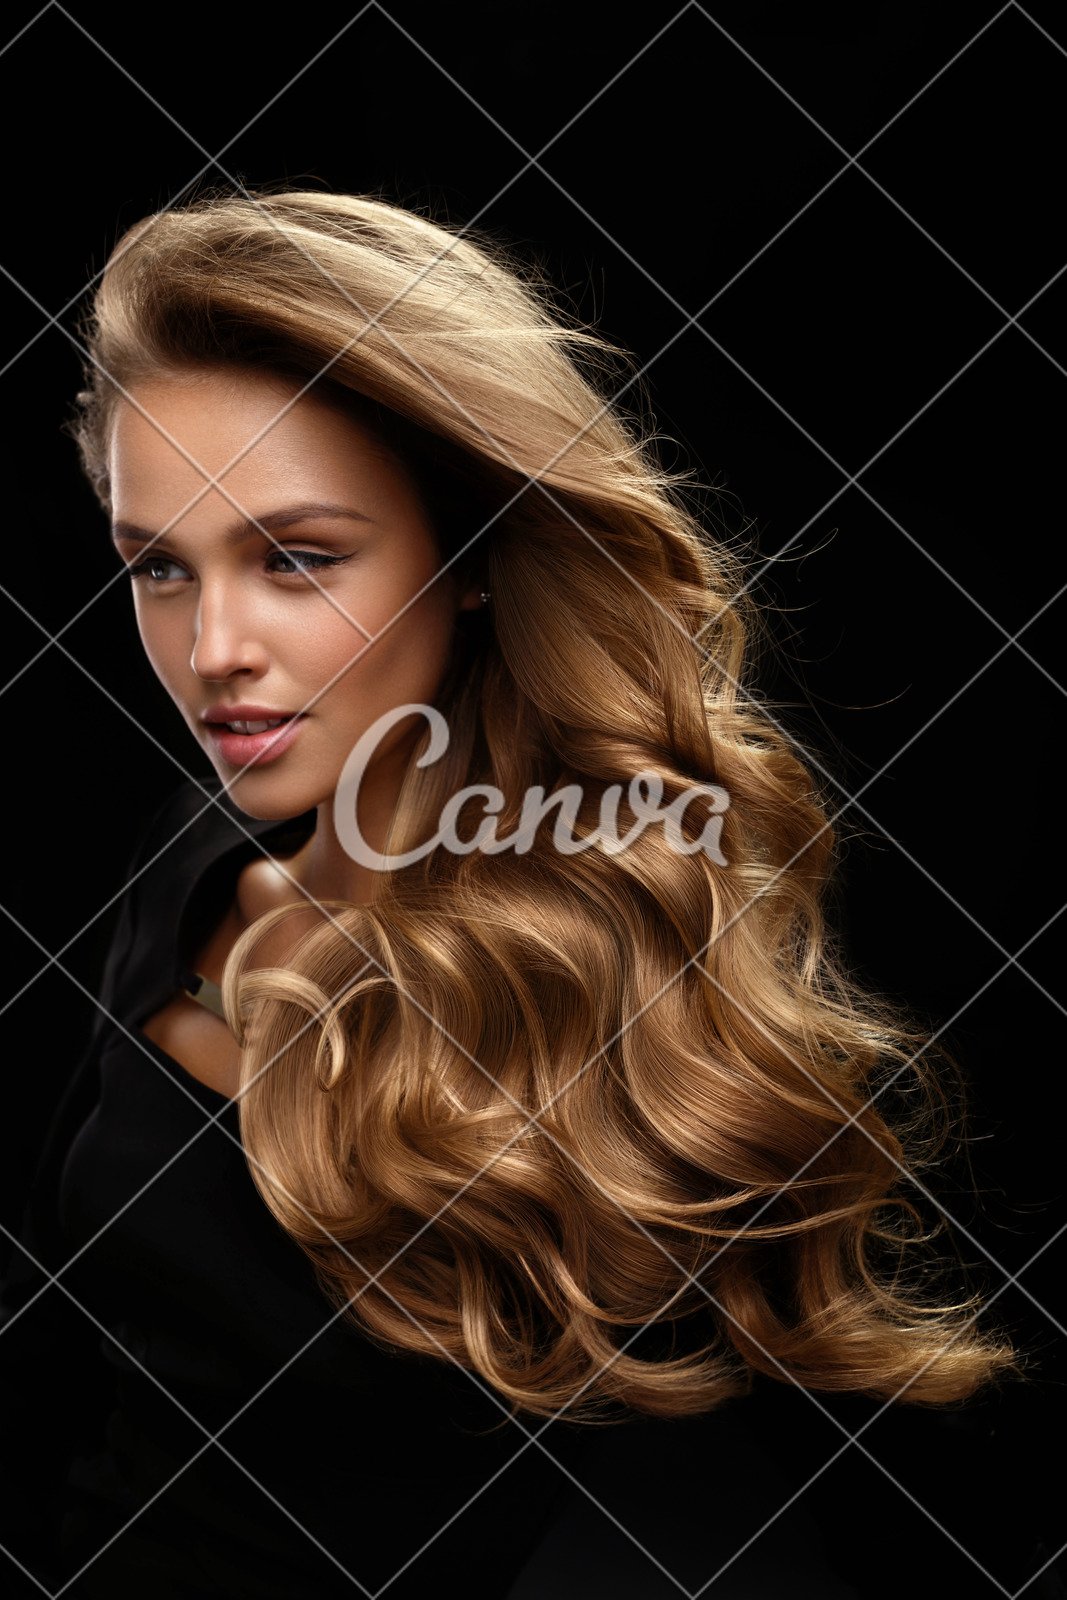 Beautiful Long Hair Woman Model With Blonde Curly Hair Photos